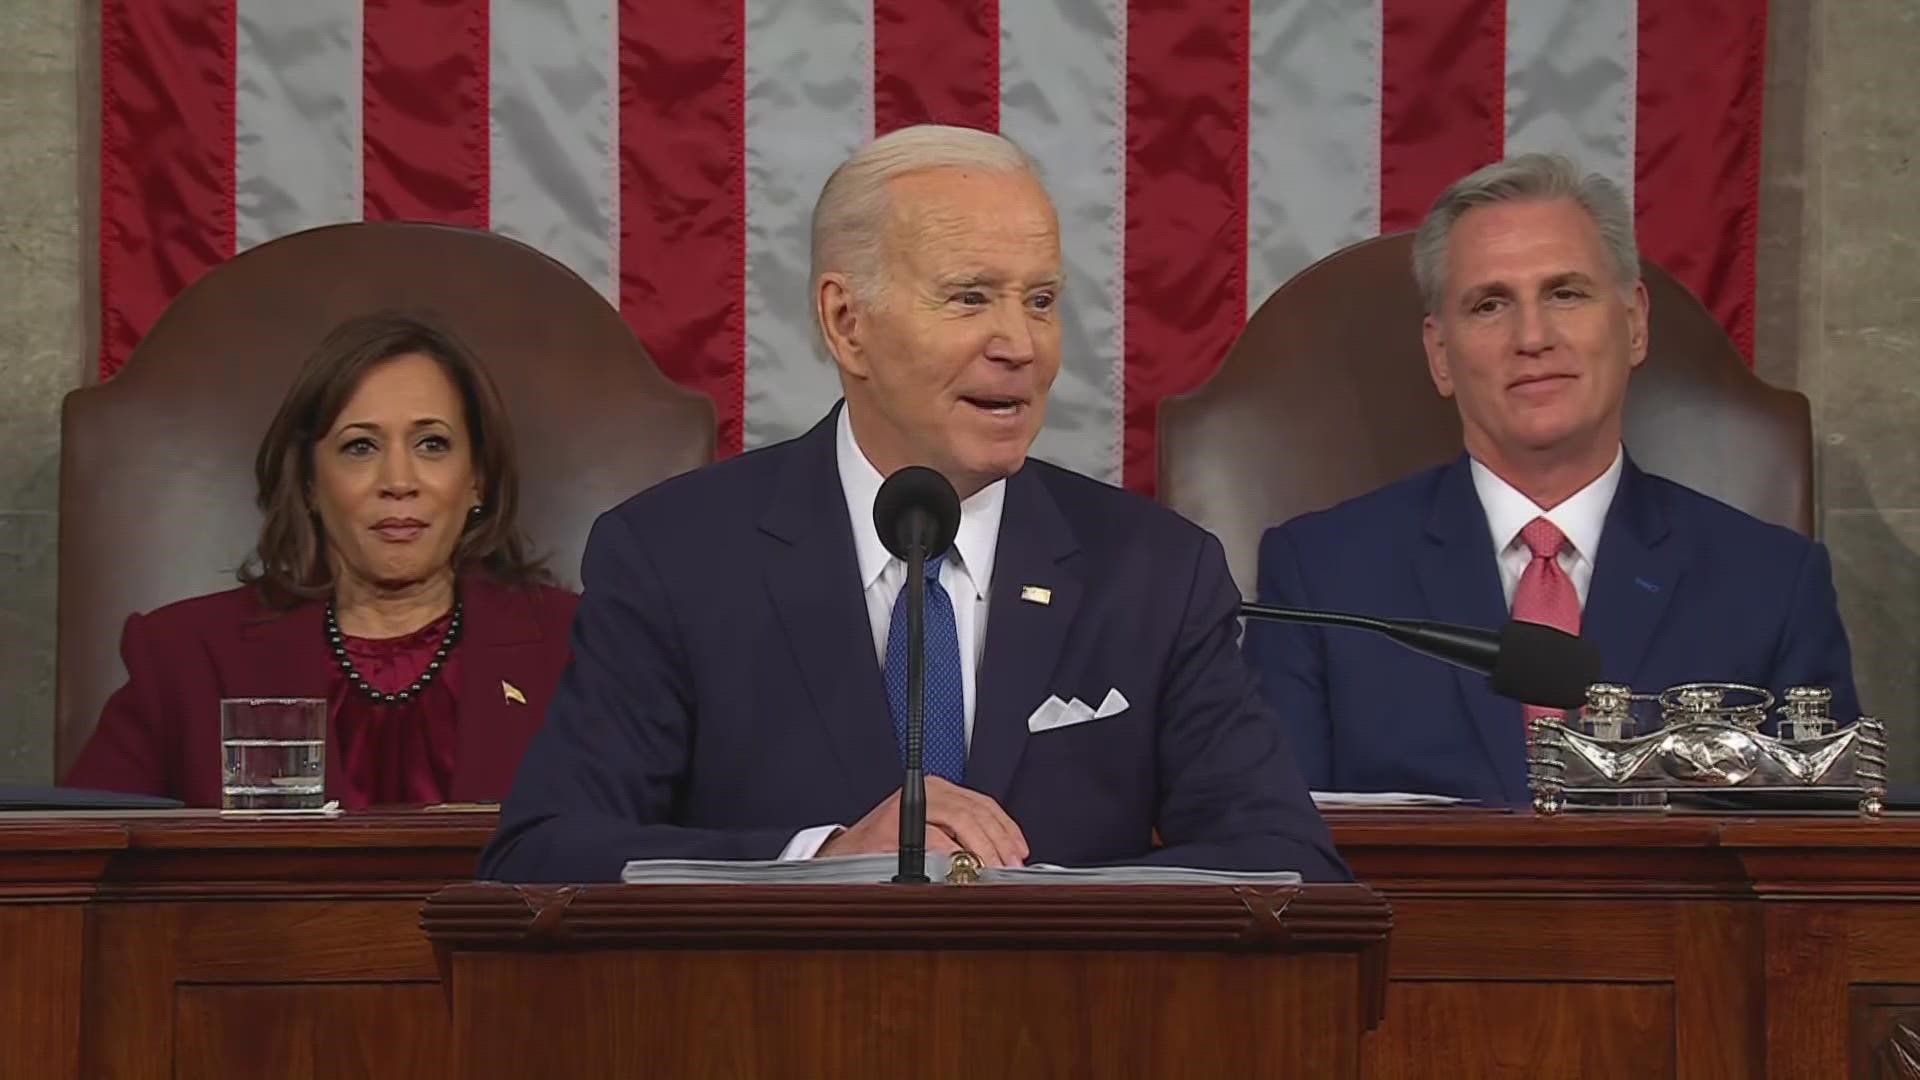 Biden also drew shouts and groans from Republicans after accusing the GOP of threatening to end Medicare and Social Security.